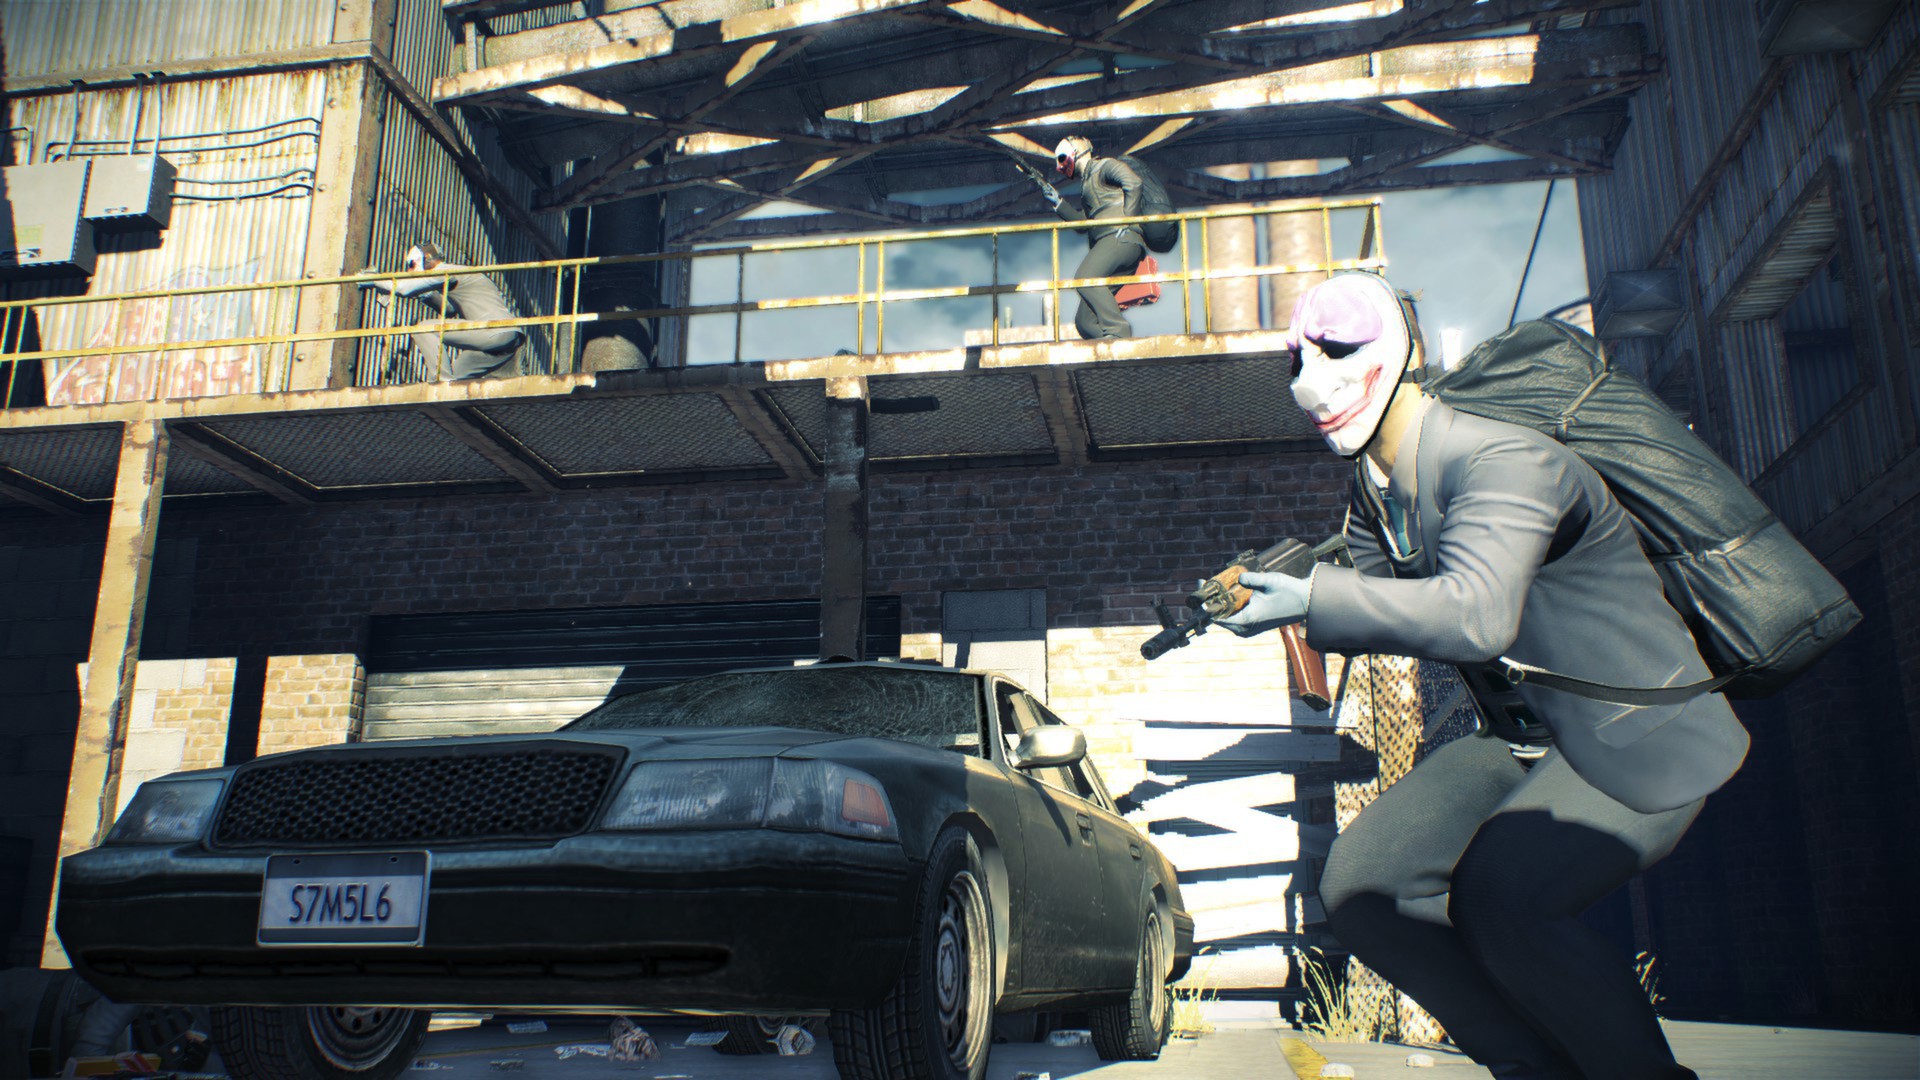 payday 2 free download multiplayer